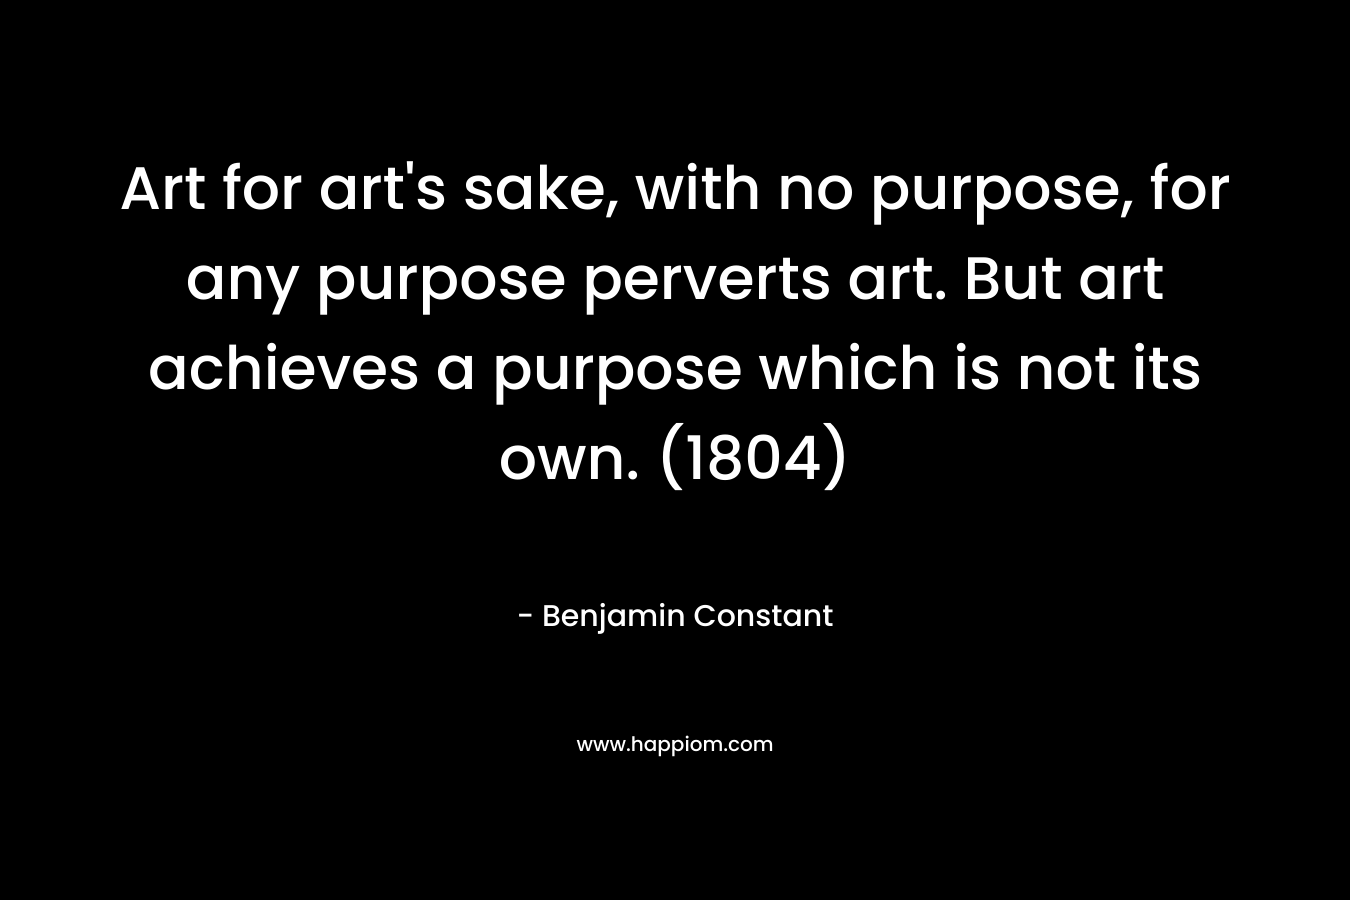 Art for art's sake, with no purpose, for any purpose perverts art. But art achieves a purpose which is not its own. (1804)